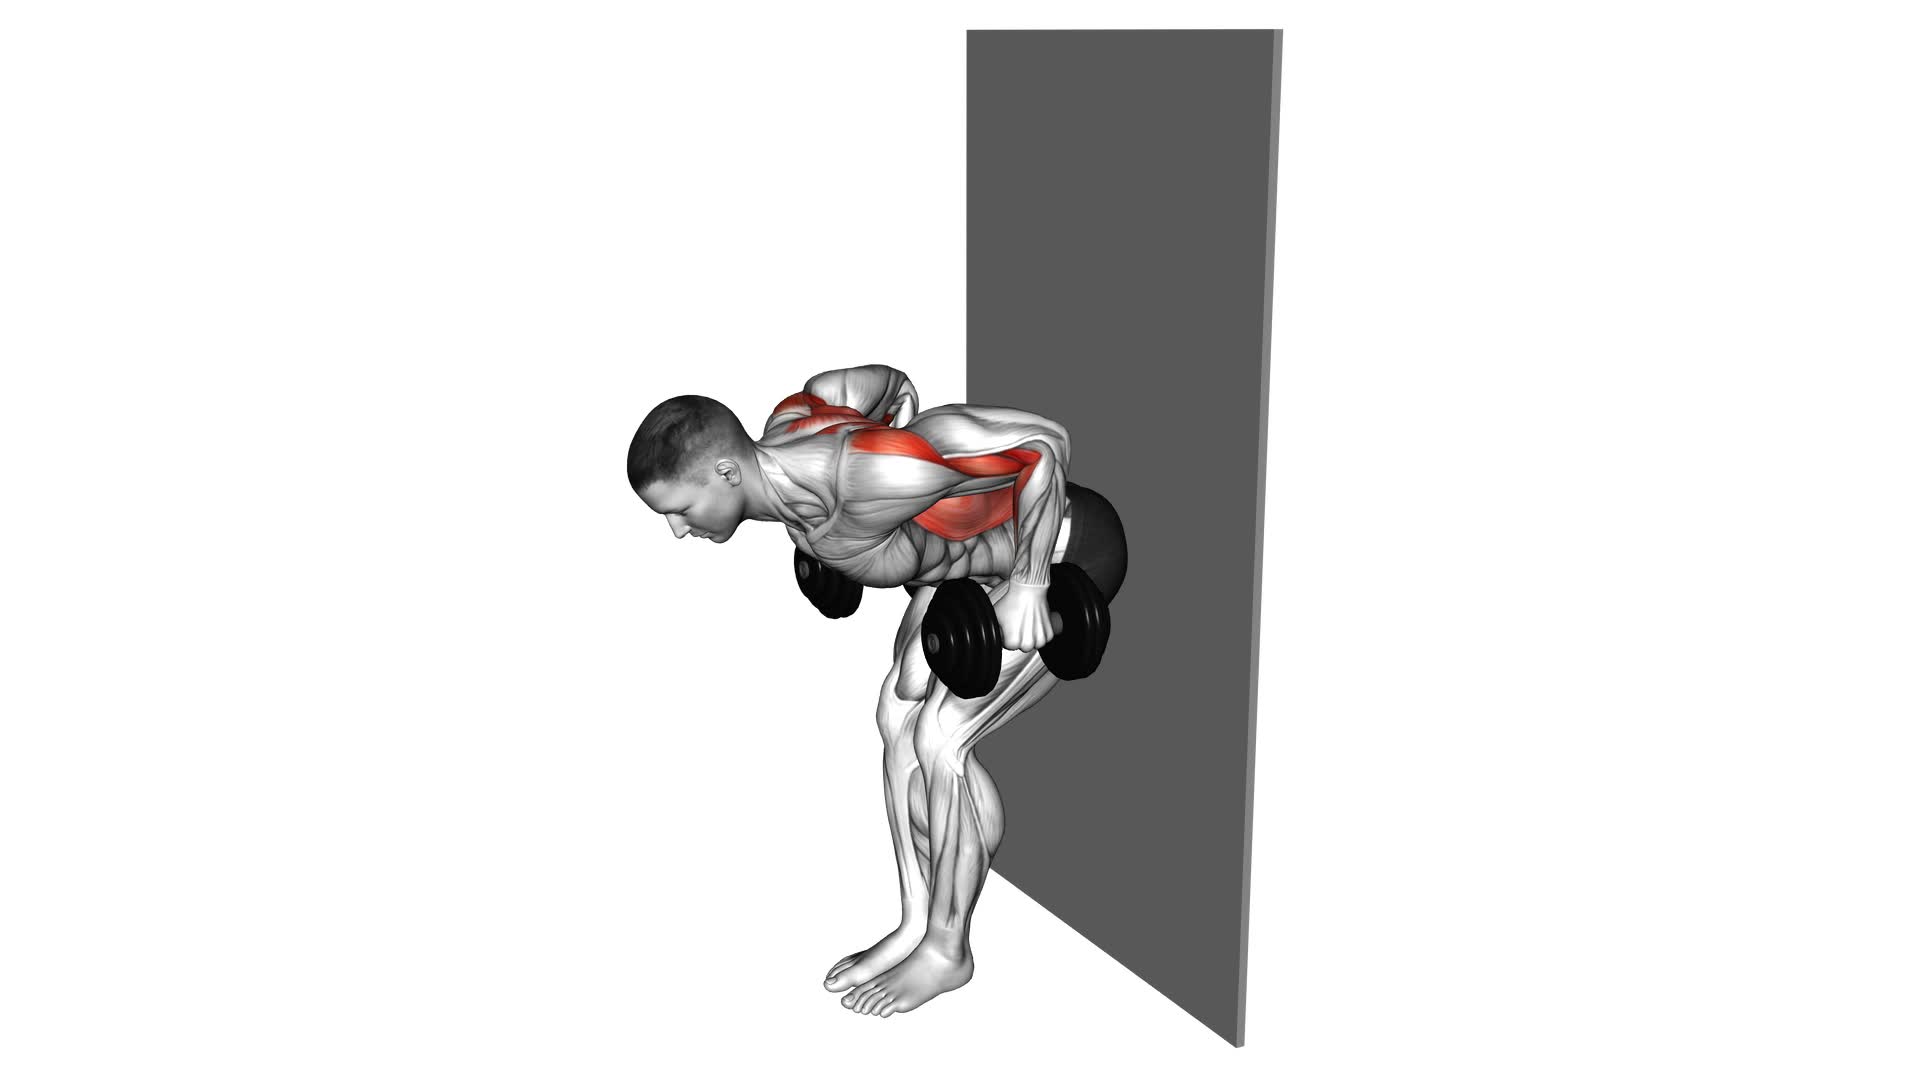 Dumbbell Bent Over Row Against Wall - Video Exercise Guide & Tips